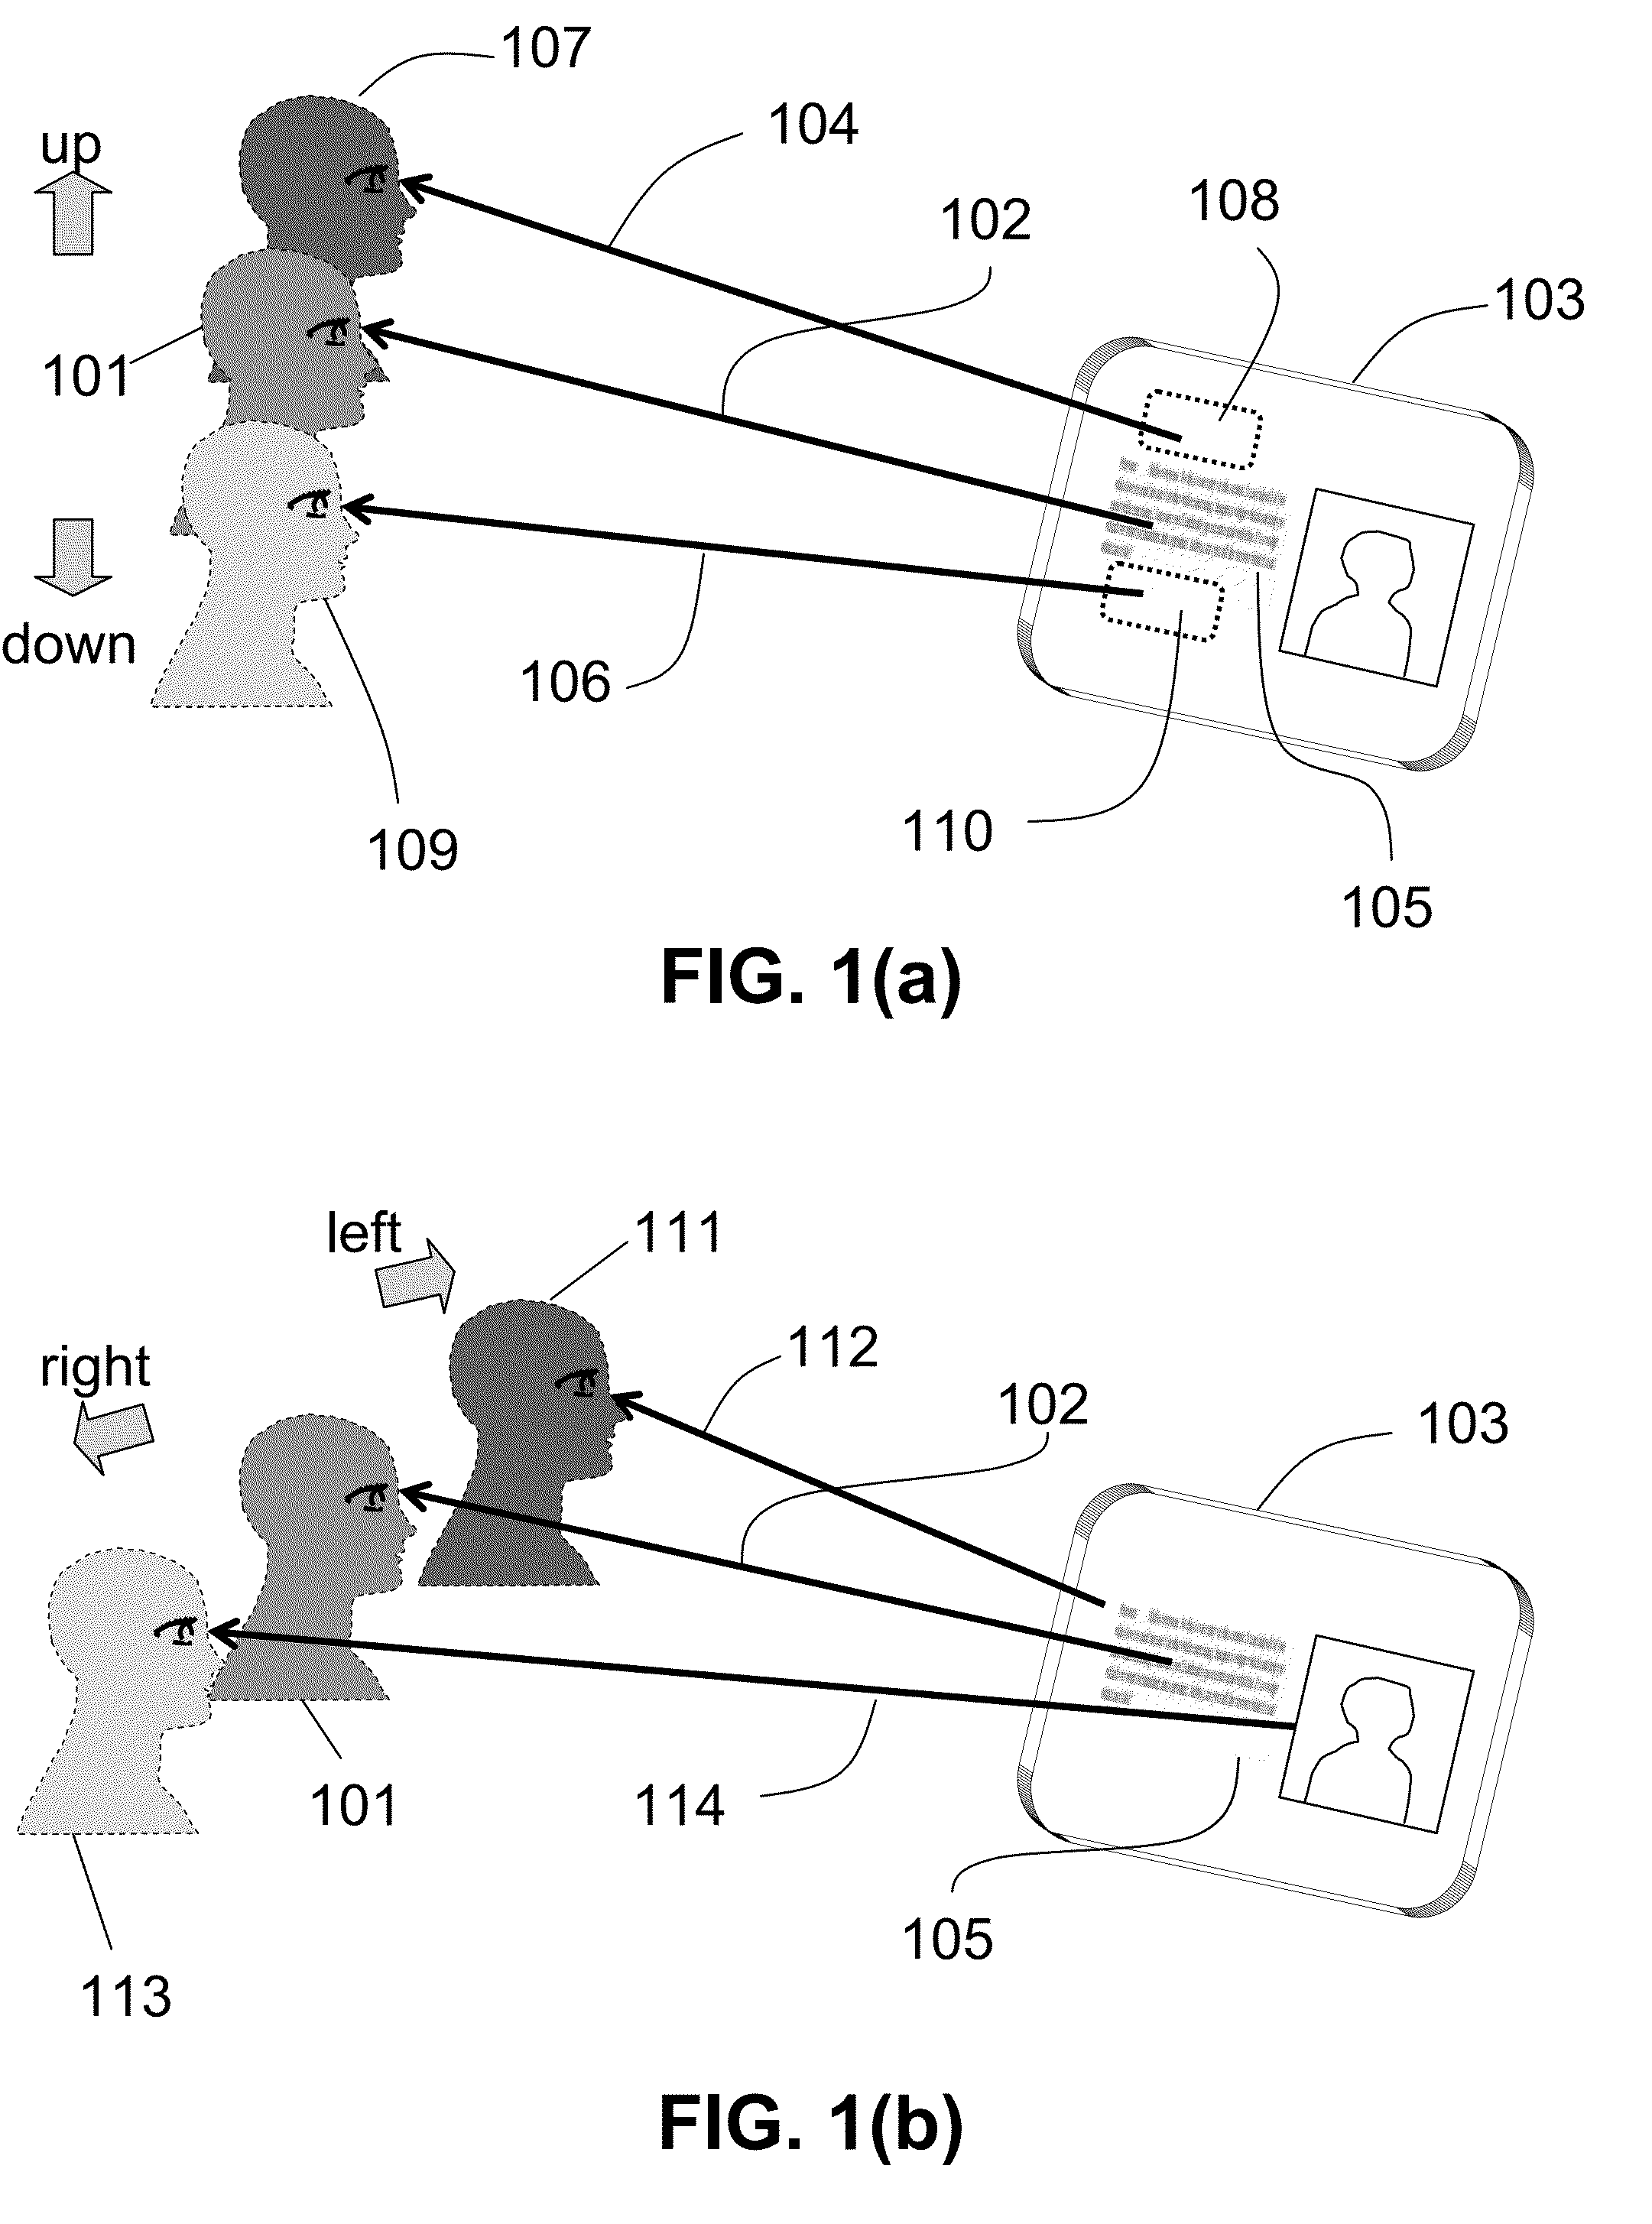 Method and apparatus to continuously maintain users eyes focused on an electronic display when either one or both are moving